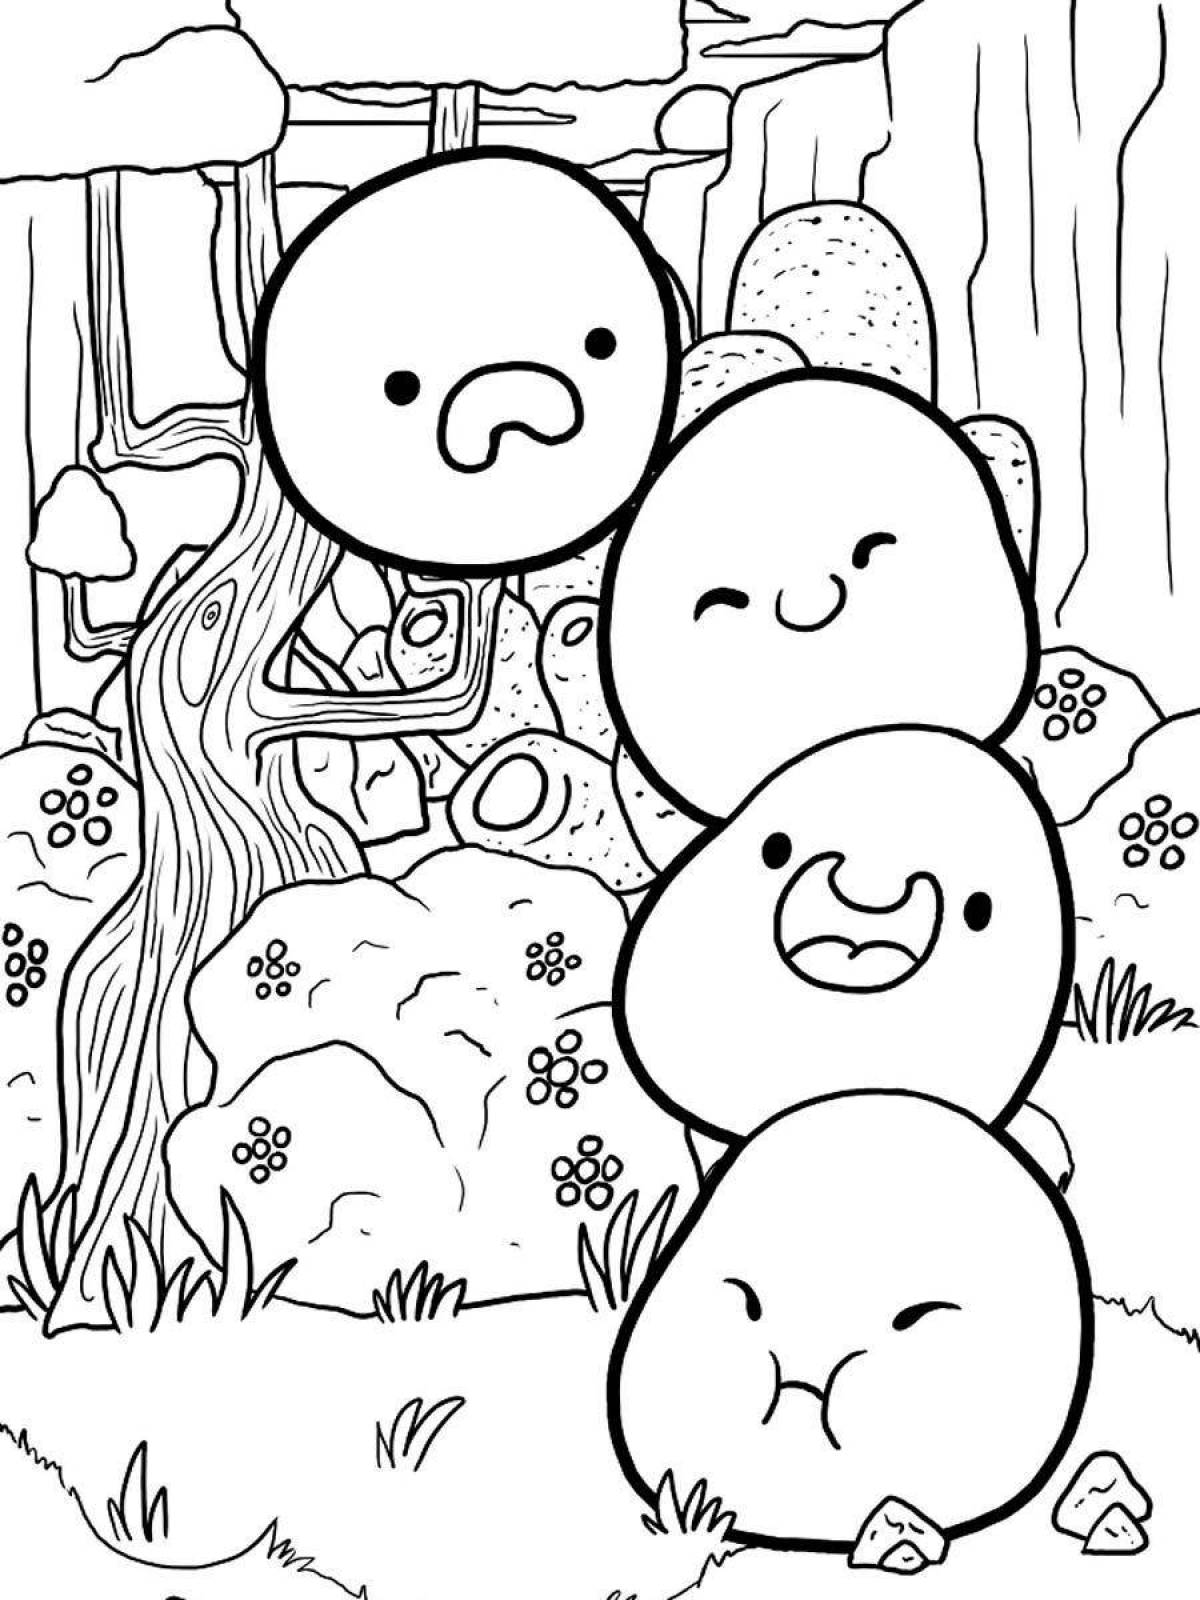 Comic coloring slime rancher 2